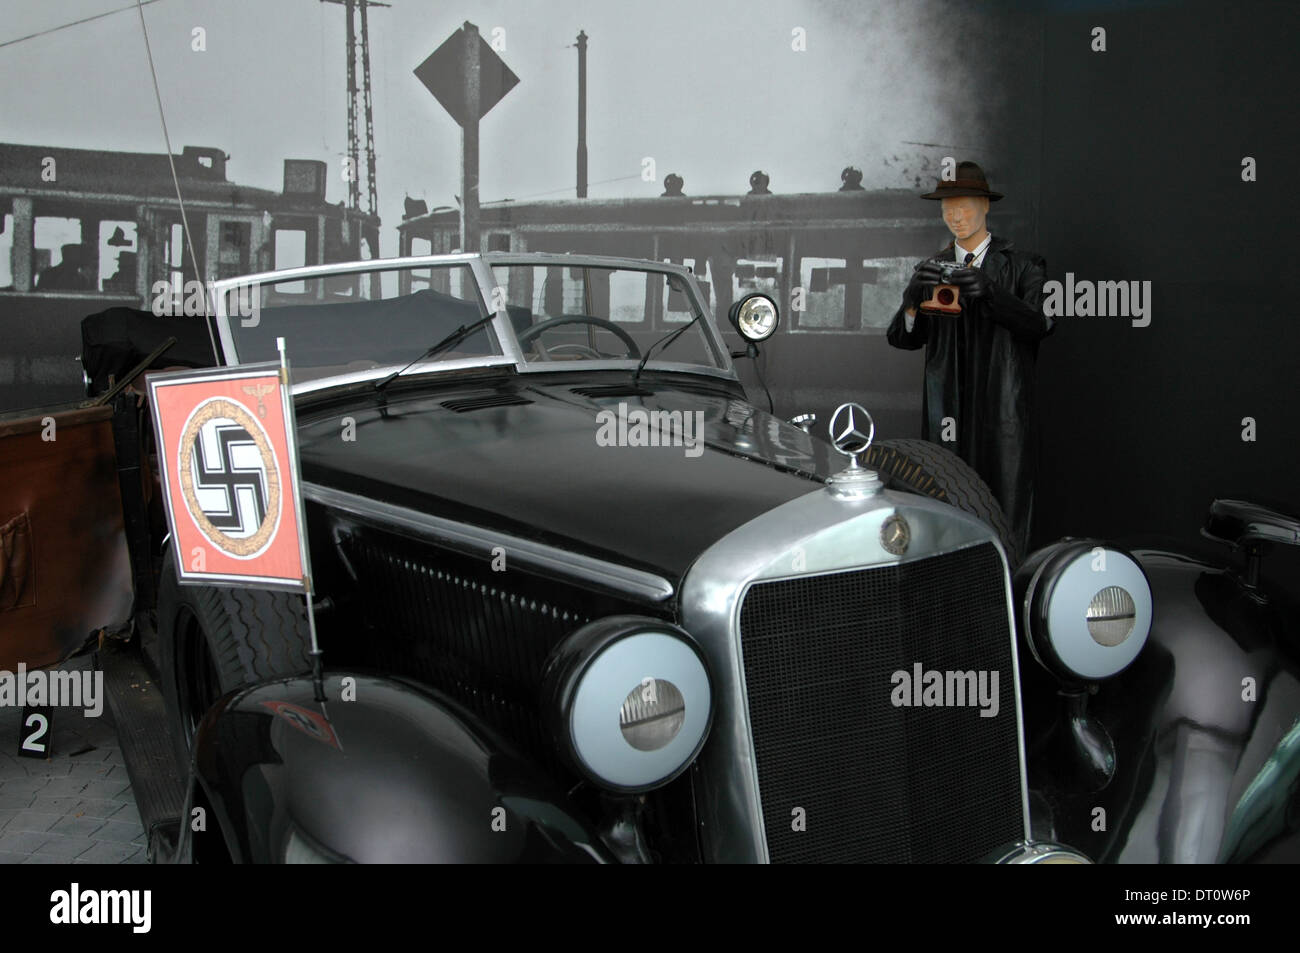 A Mercedes 320 Convertible B limousine car, similar to the one in which Nazi official Reinhard Heydrich was mortally wounded during Nazi occupation displayed at the Army museum Armadni muzeum in Zizkov district Prague Czech Republic Stock Photo